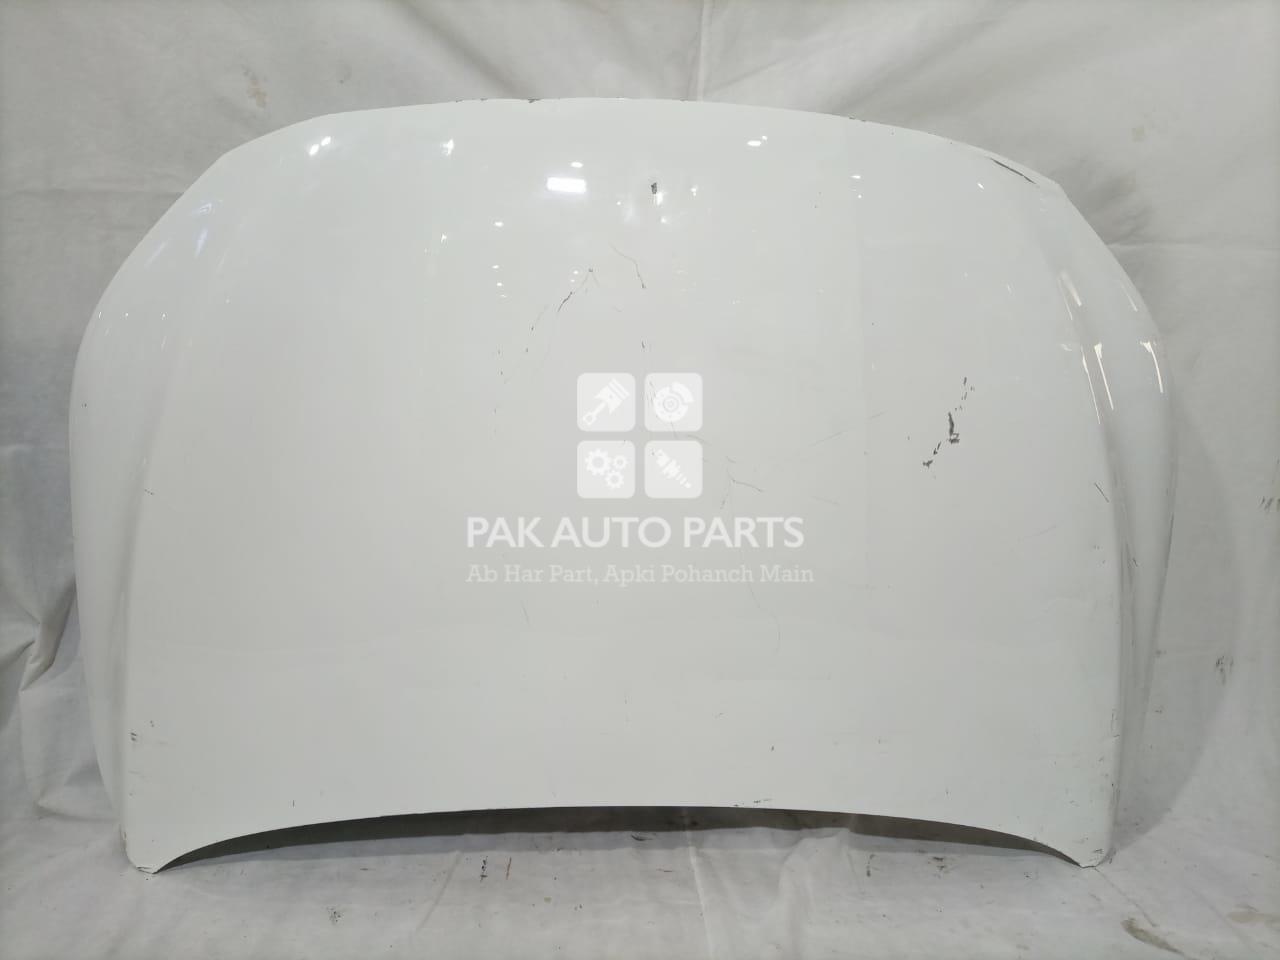 Picture of MG HS White Bonnet Hood 2020-2023